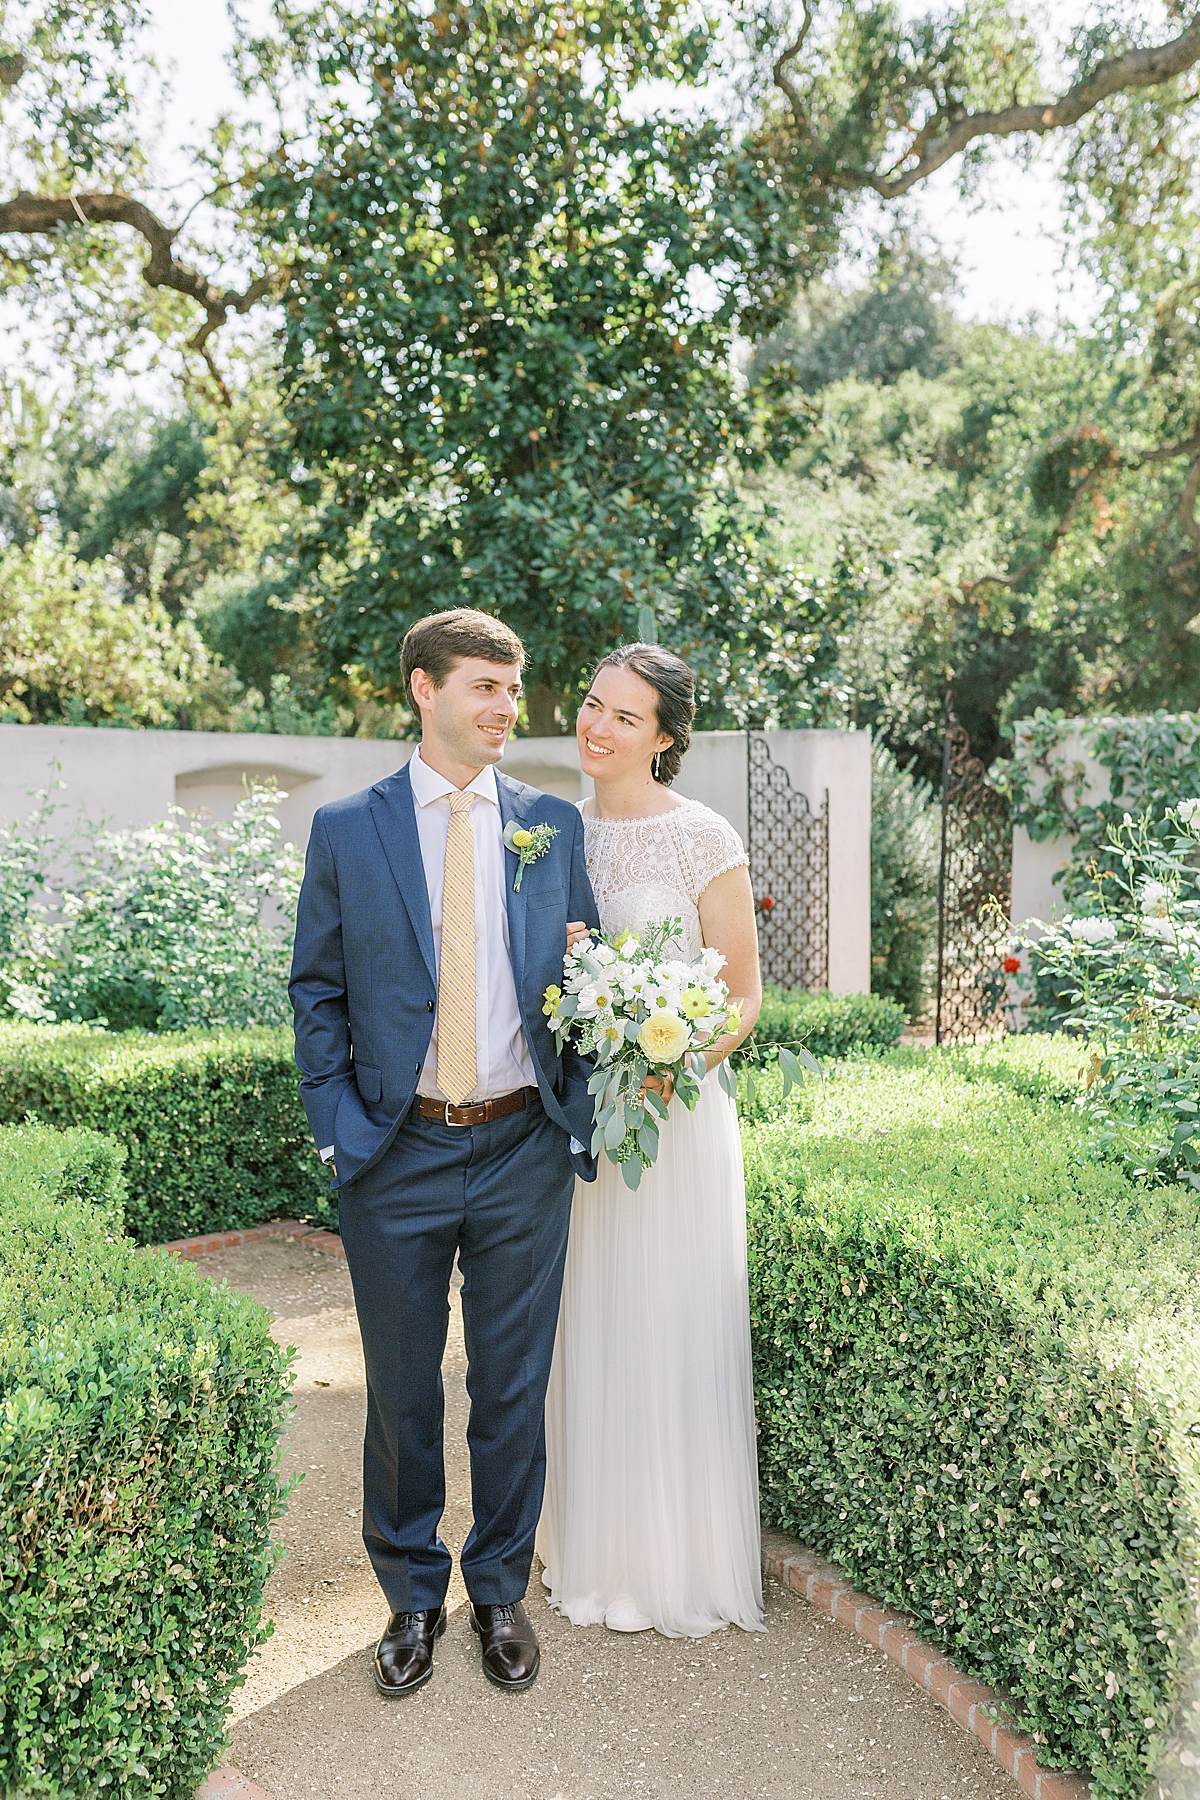 A bride and groom in the courtyard of their private estate wedding in Ojai, California